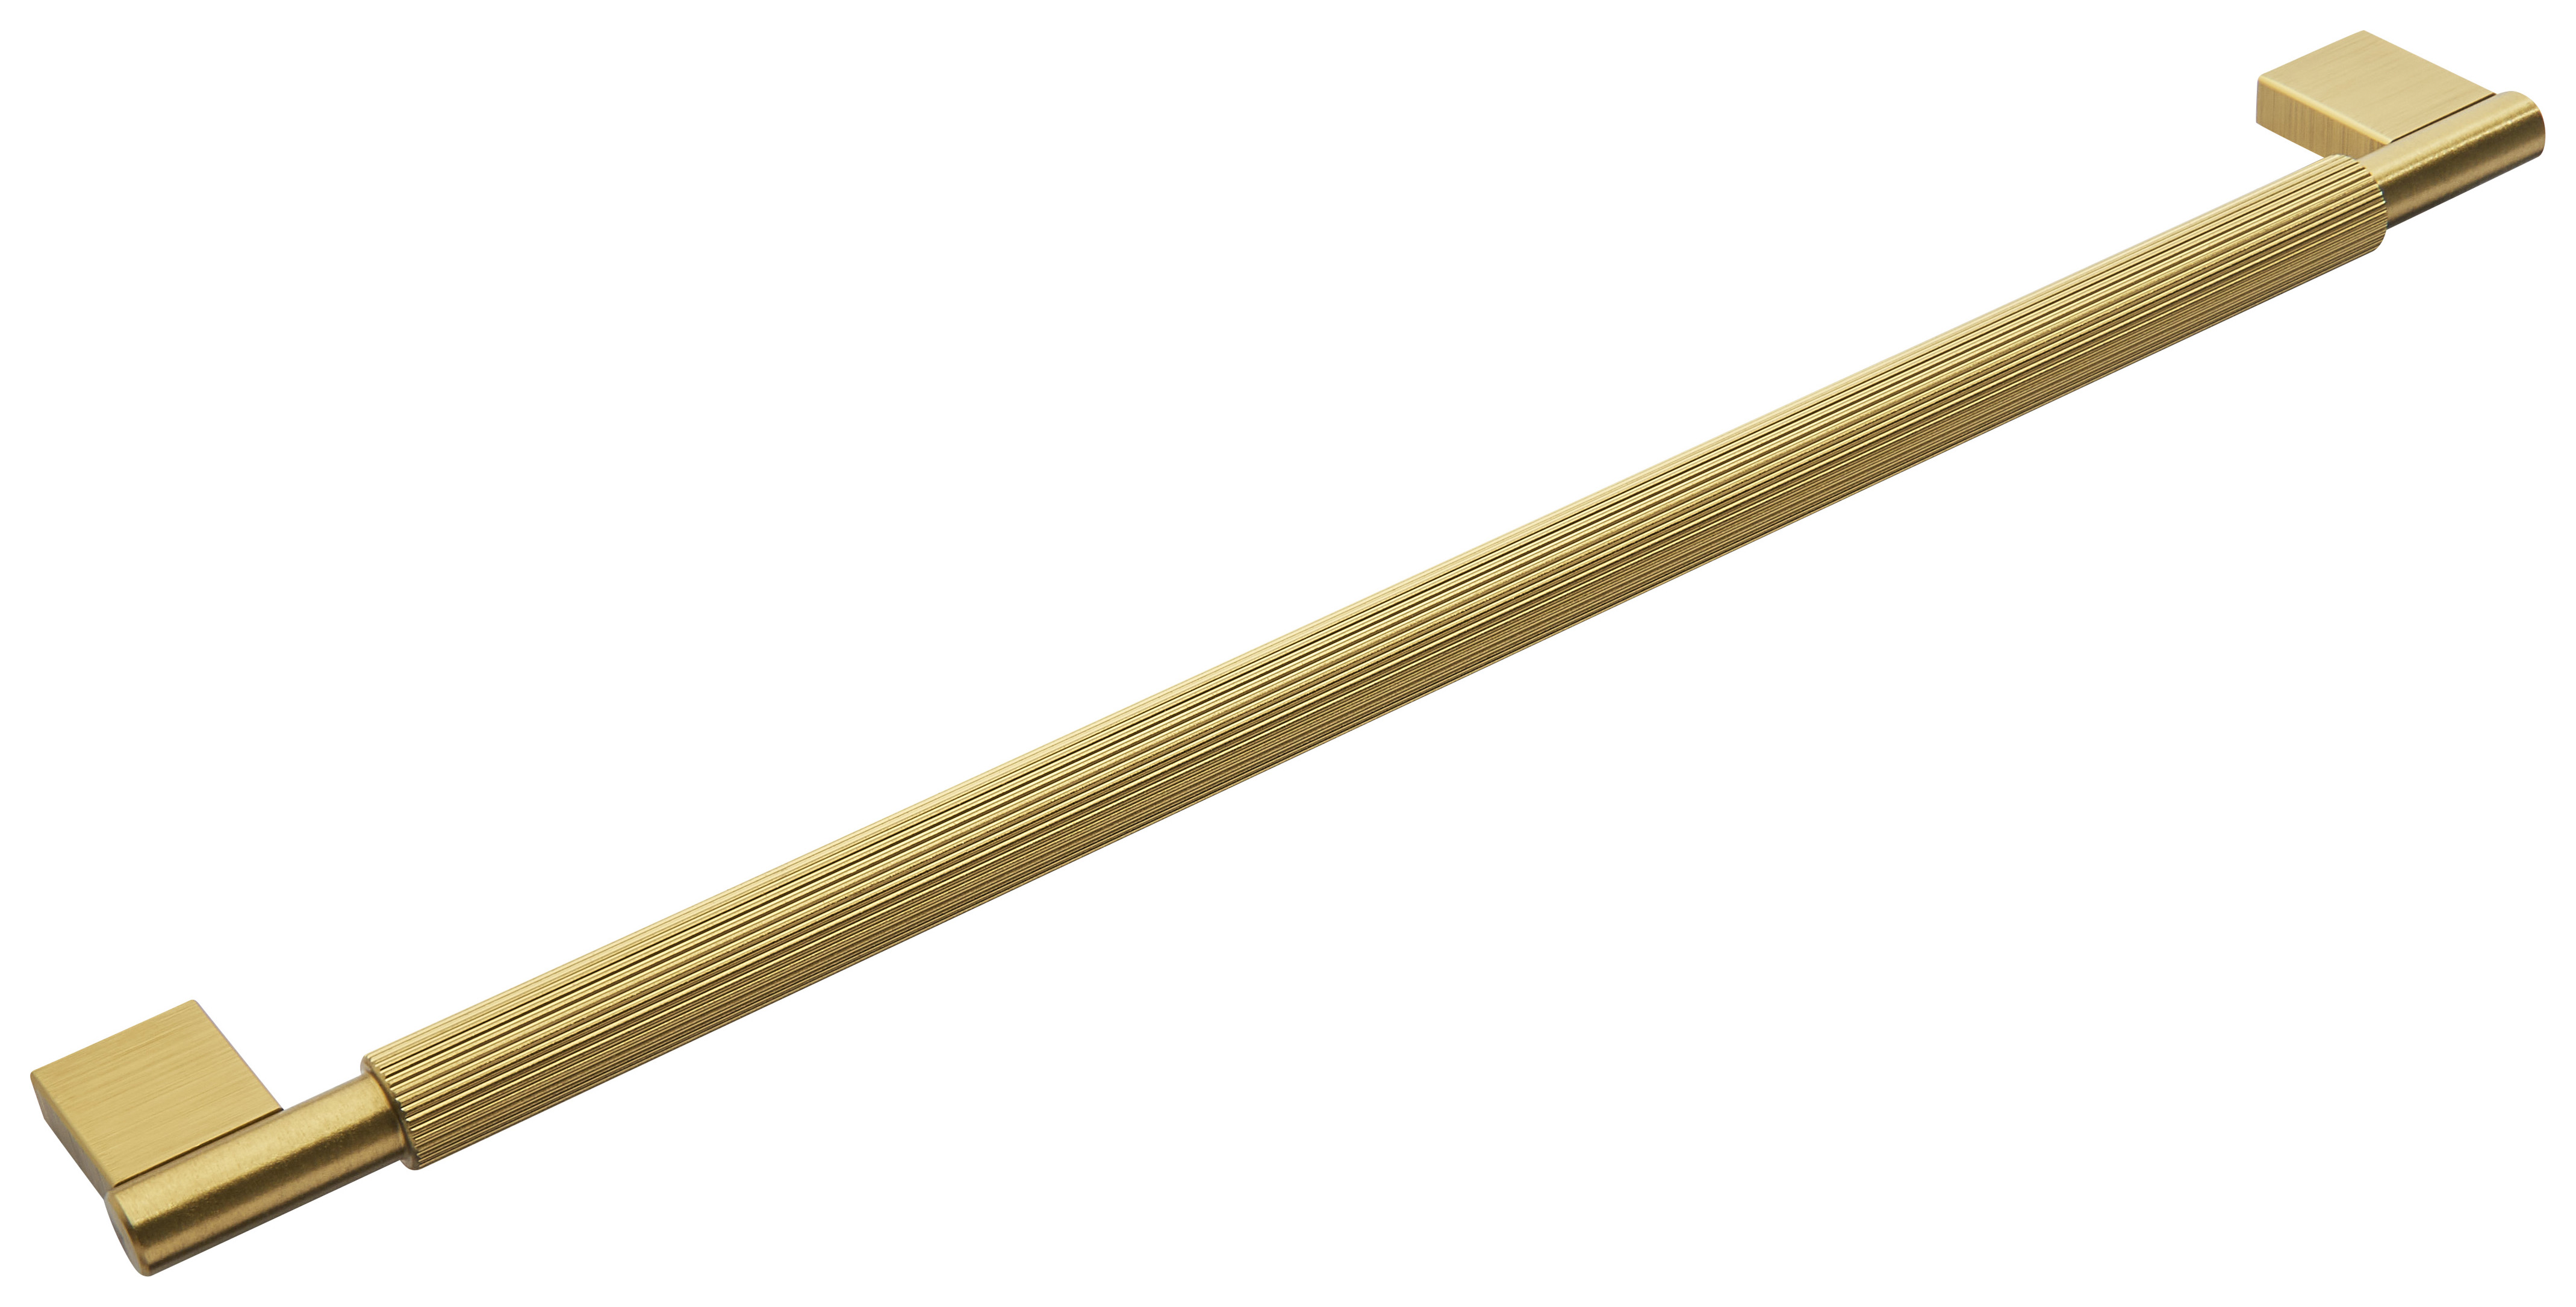 Image of Wickes Tahlia Brass Pull Handle - 342mm